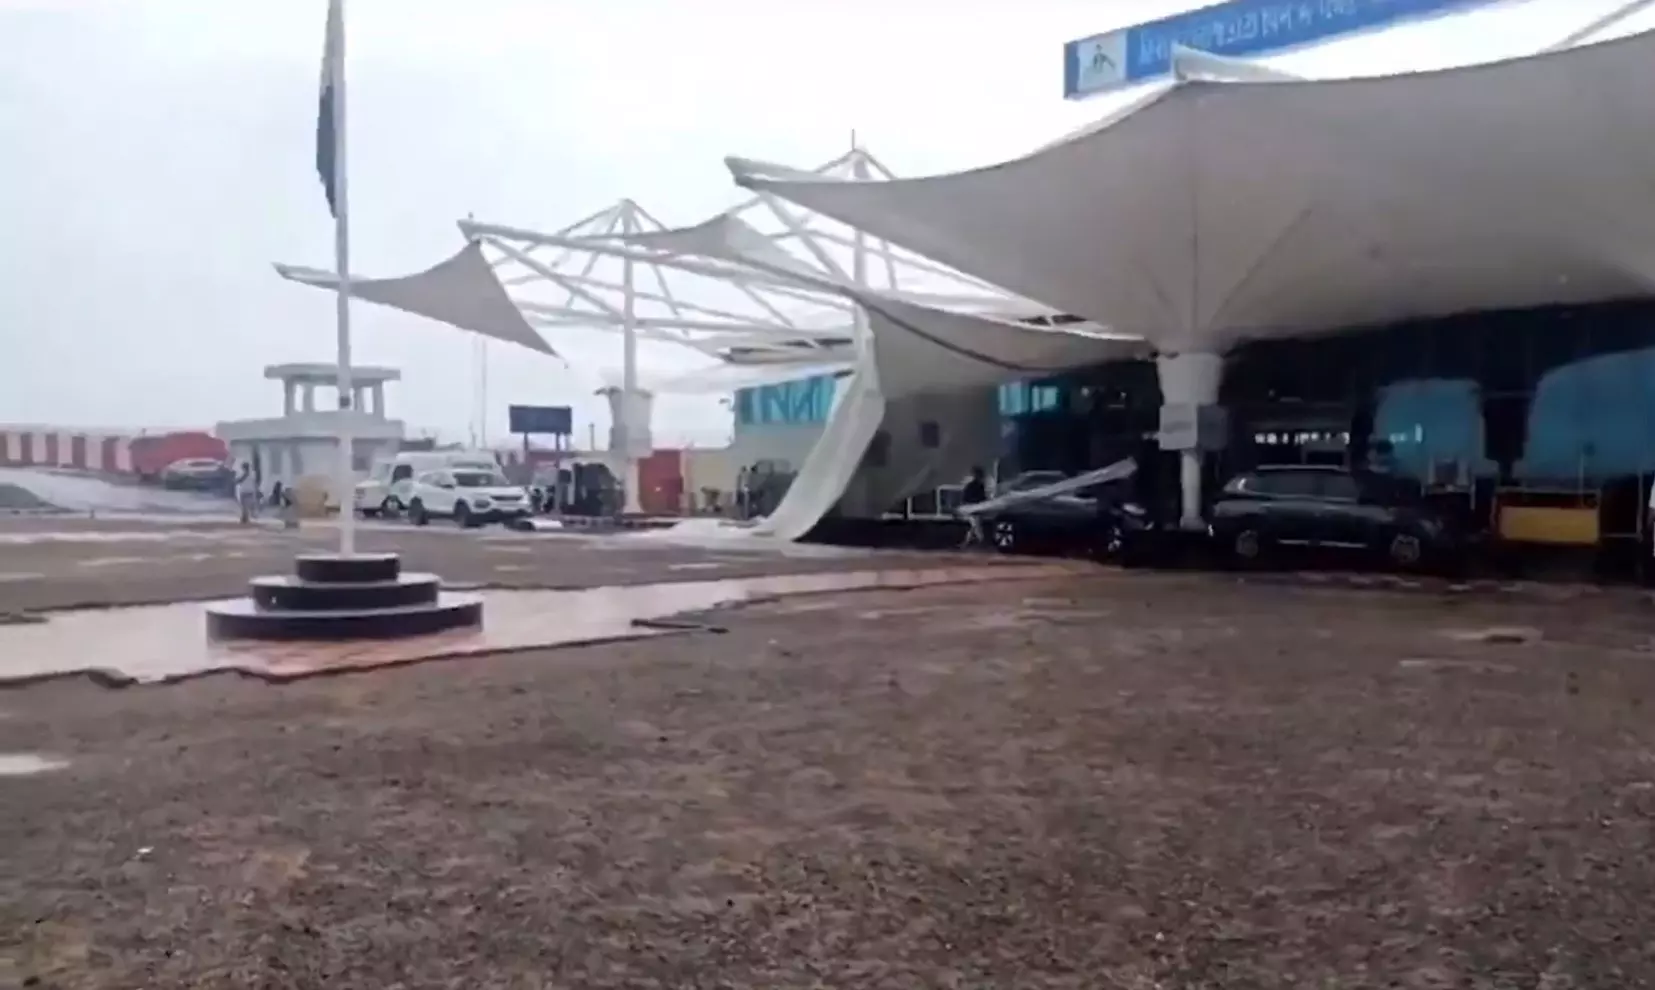 Gujarat: Canopy collapses at Rajkot airport amid heavy showers